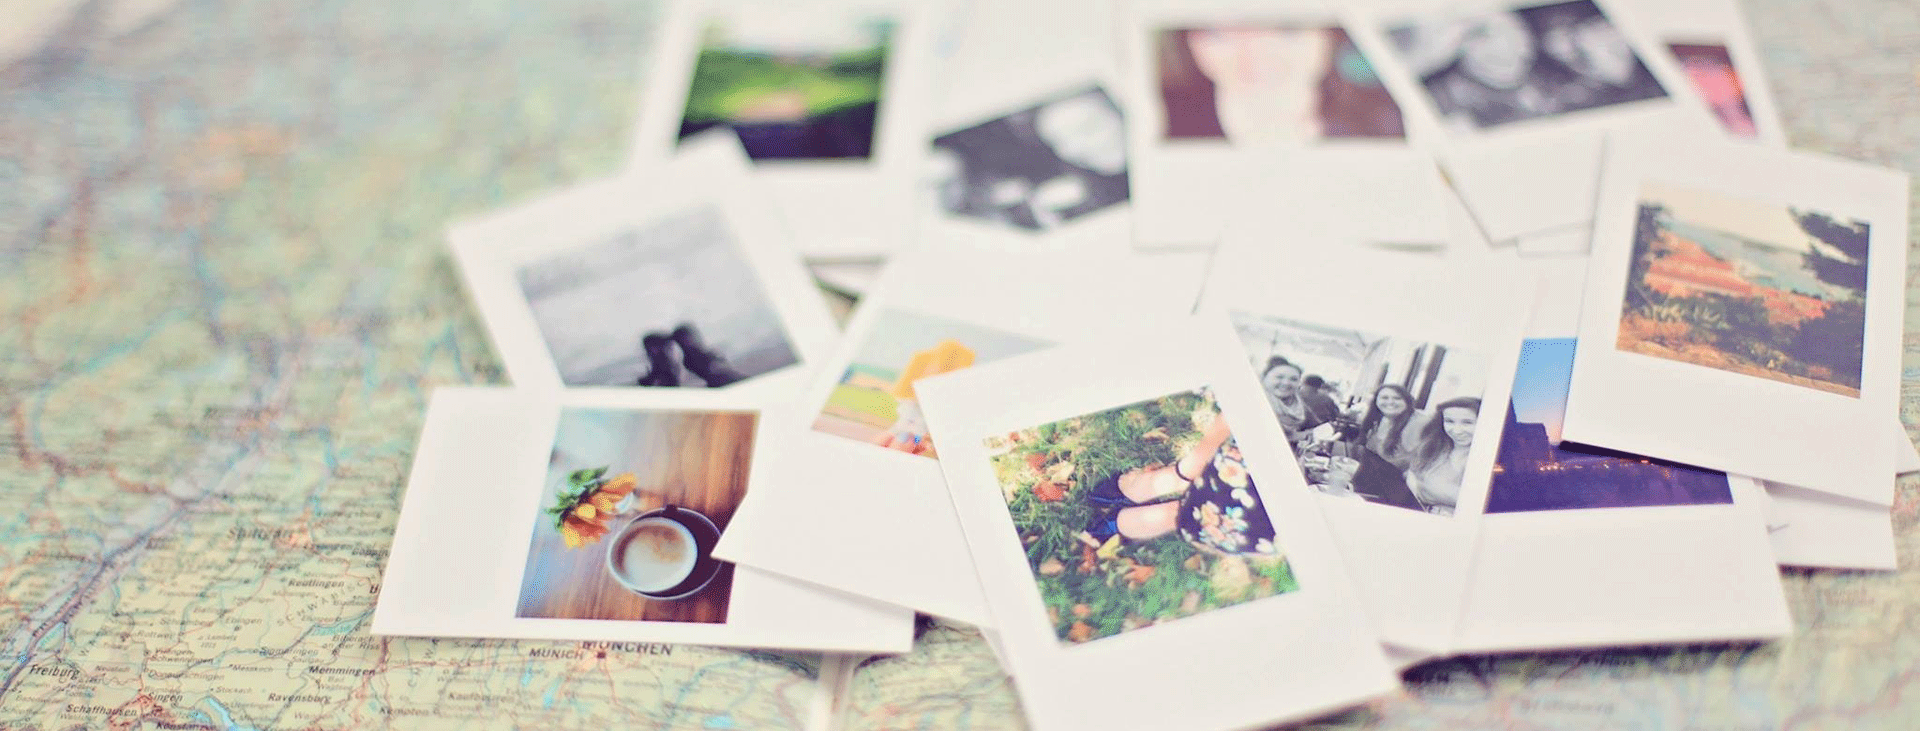 A pile of blurred polaroids on a travel map